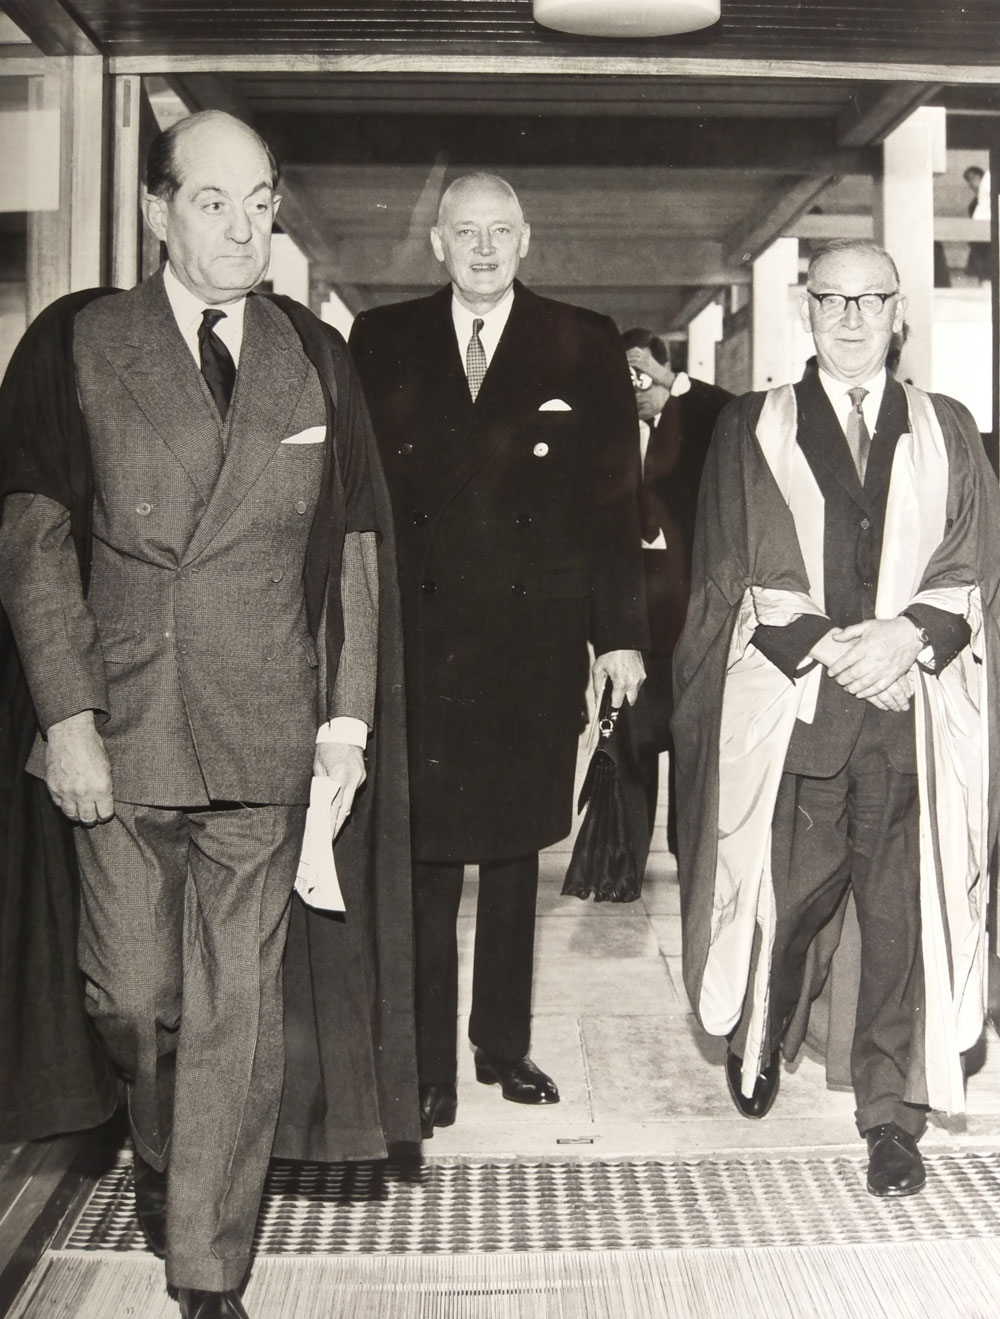 The Lord CHYancellor opens the Wolfson Hall and libraries